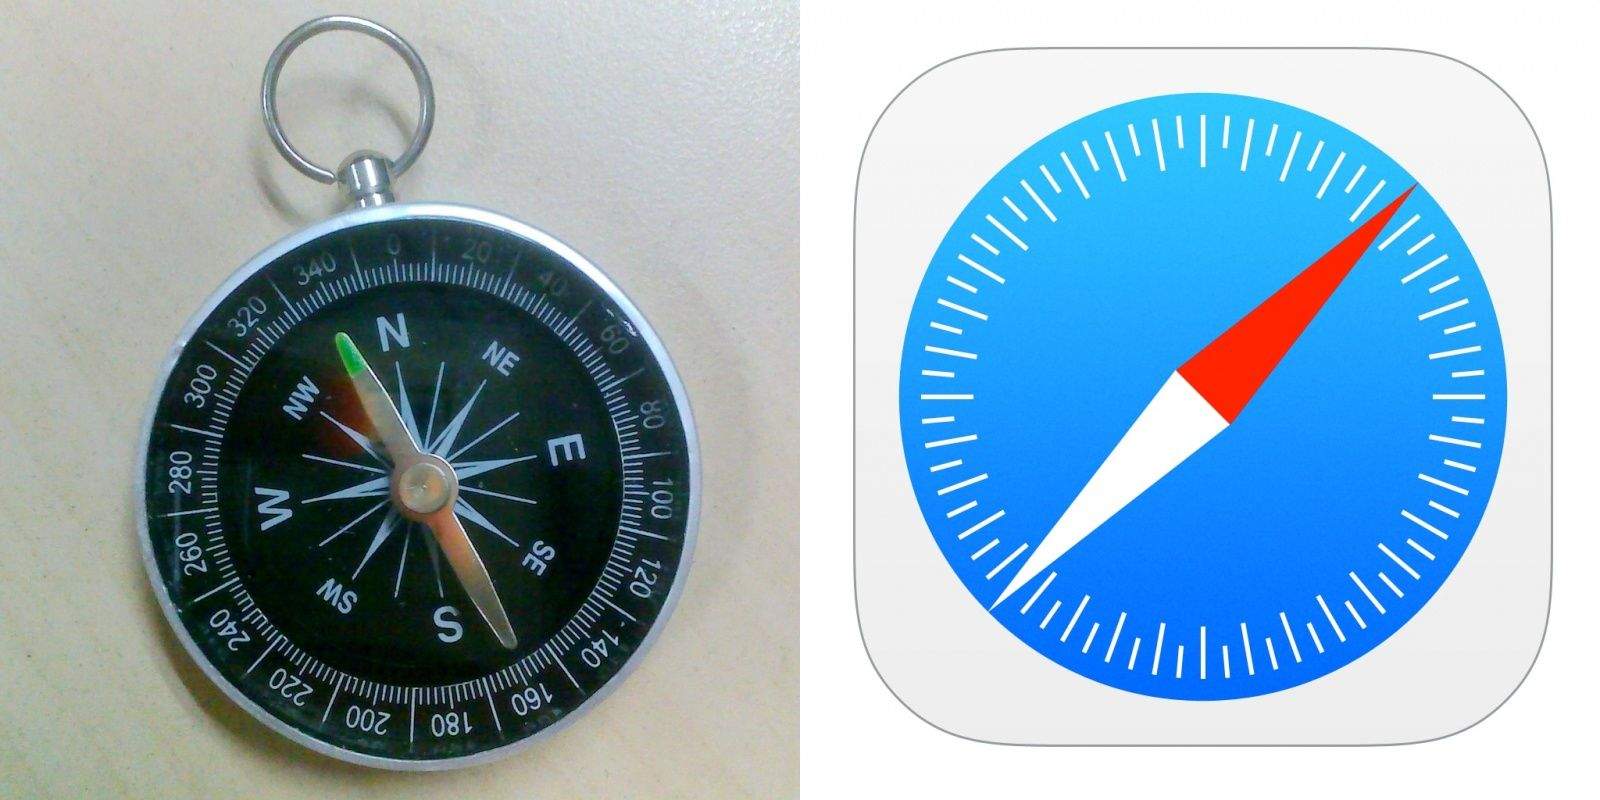 Safari App Logo - Meet The Real-World Products That Inspired The iOS 7 Icons | Cult of Mac